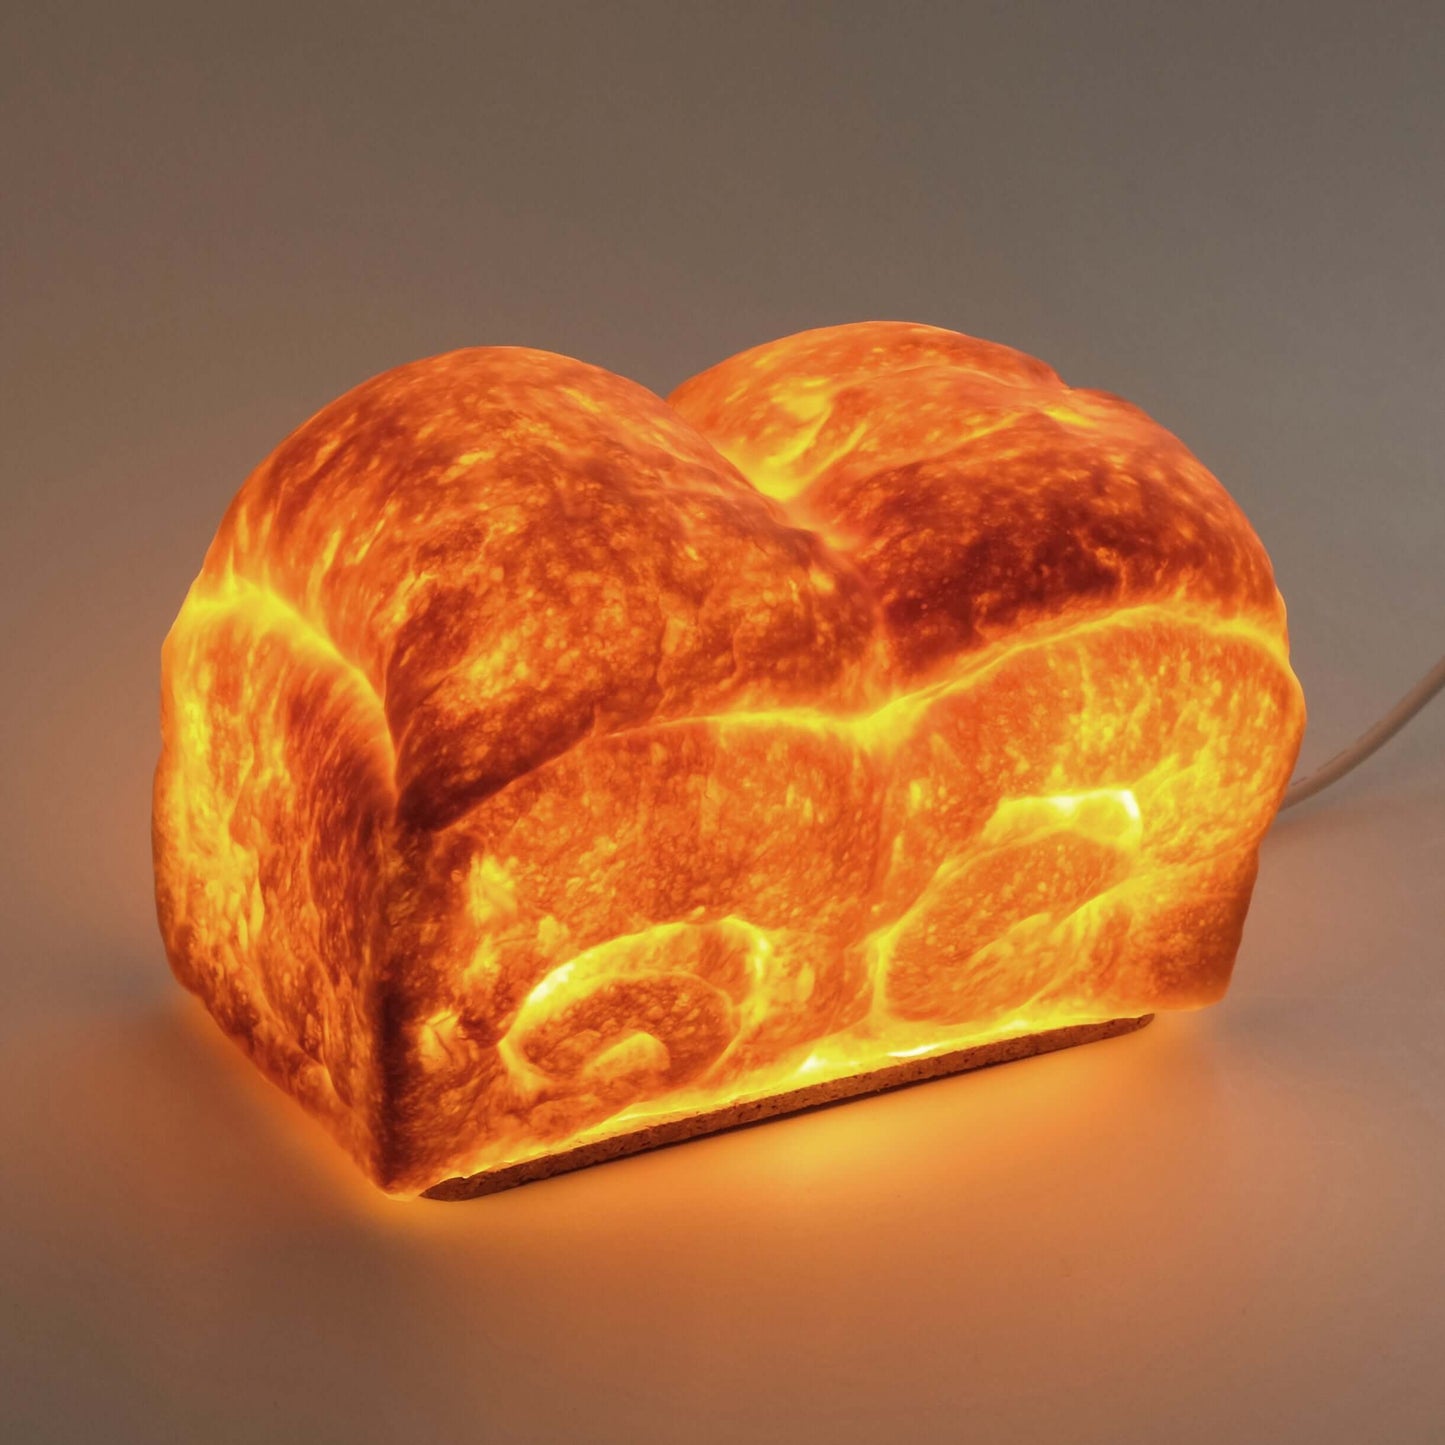 Pain de Mie Bread Lamp (with AC Power Cord)